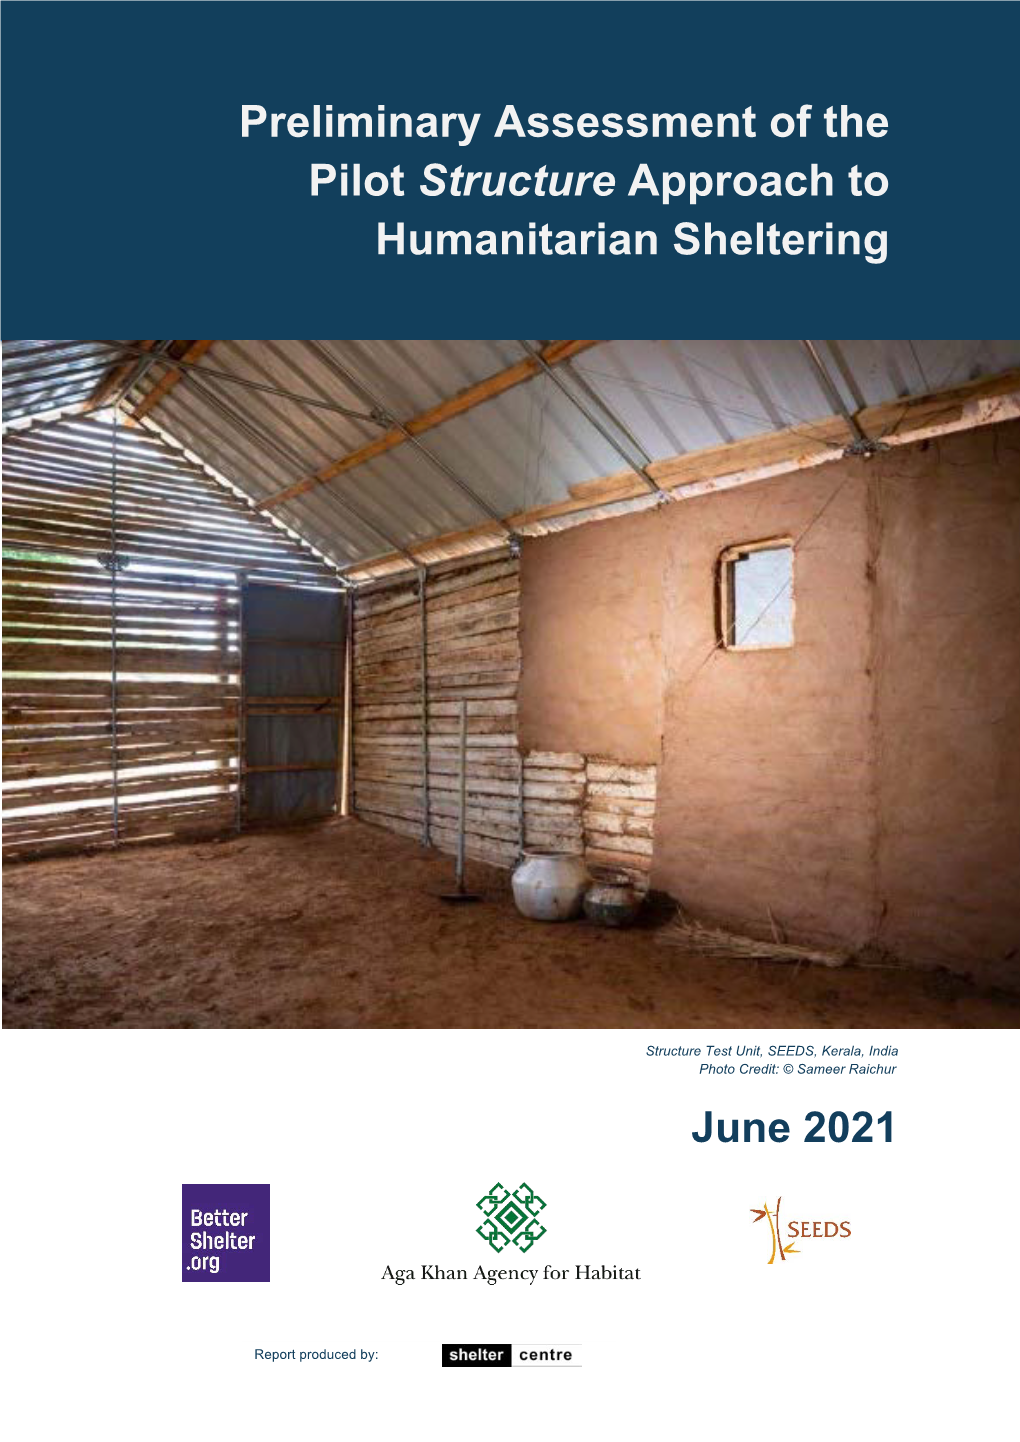 Preliminary Assessment of the Pilot Structure Approach to Humanitarian Sheltering